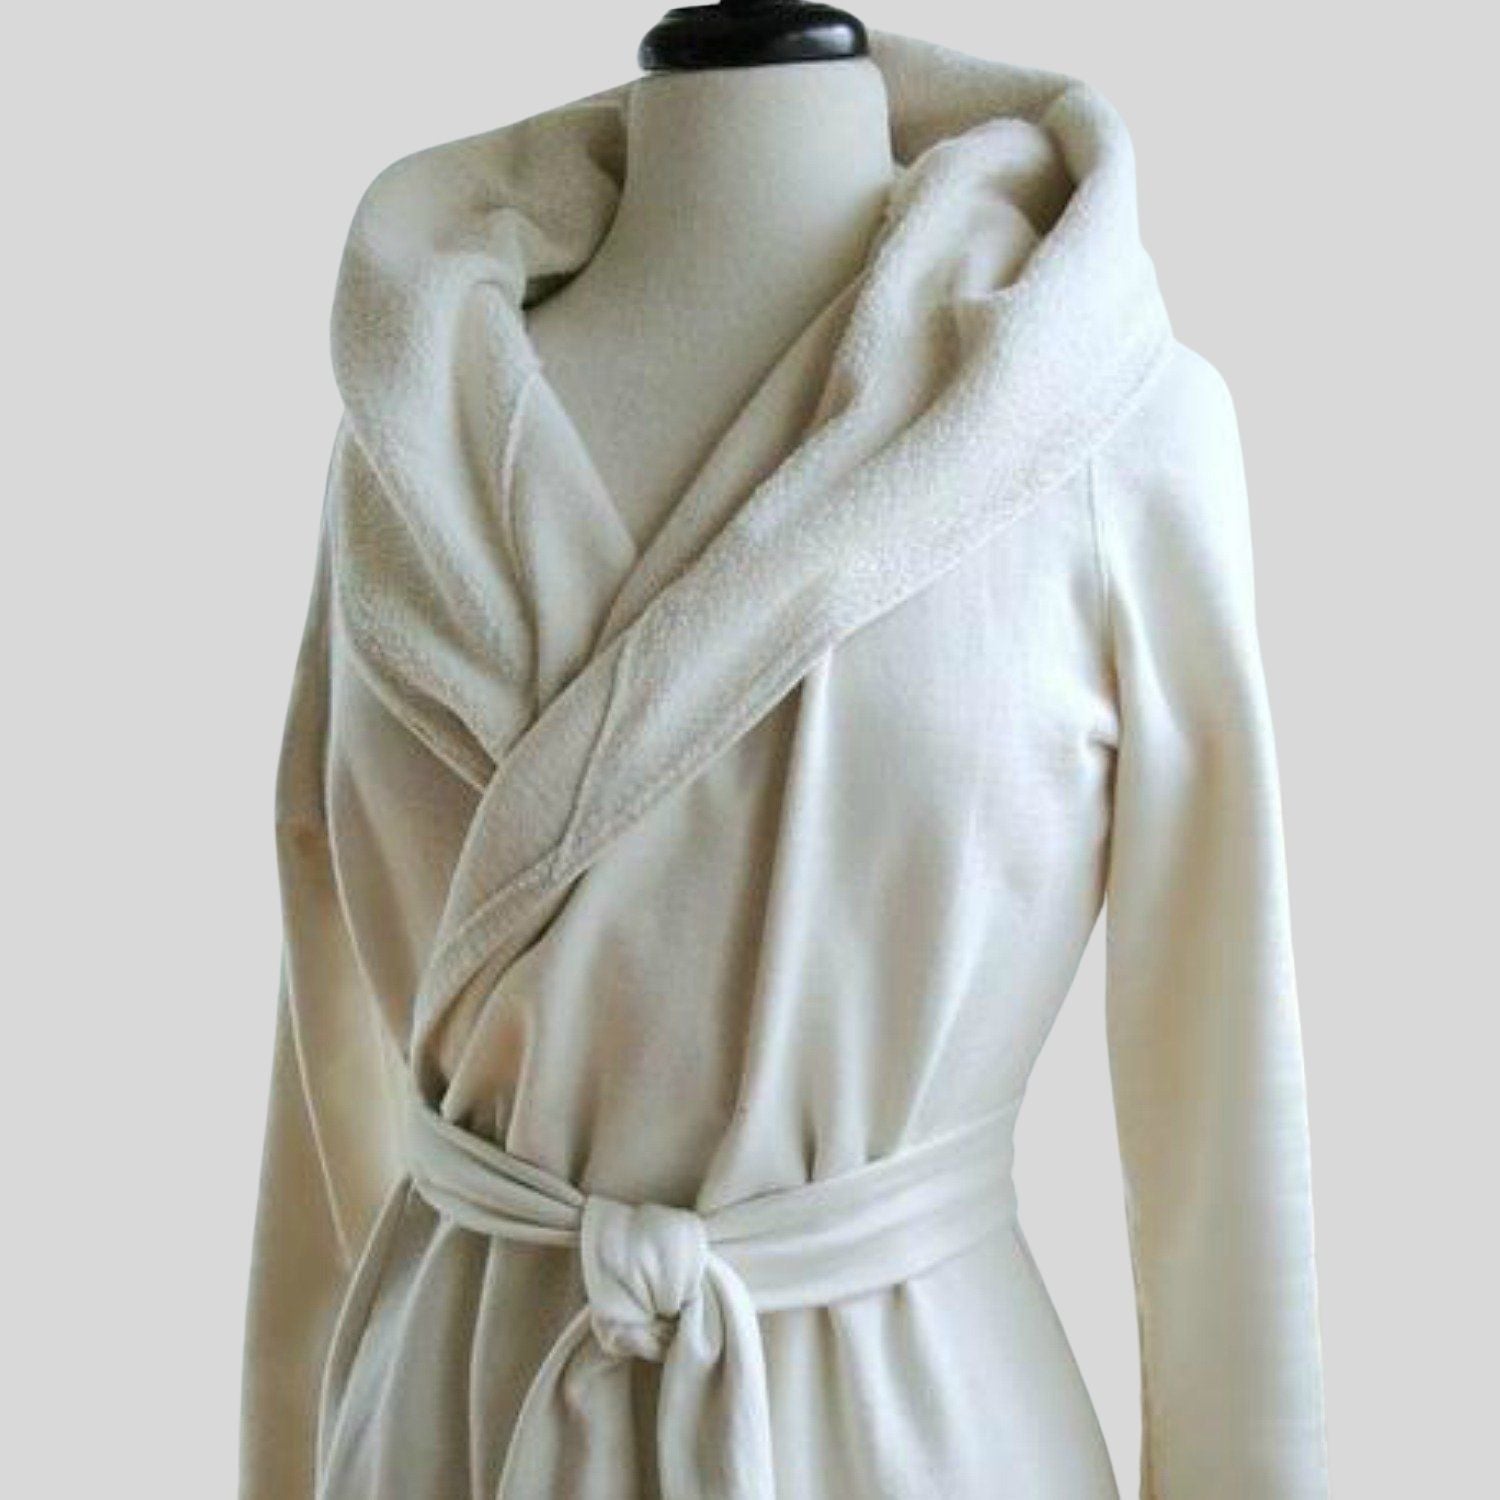 Best Long Hooded Bath Robe for Women | Organic Cotton ankle length robes | Shop Econica